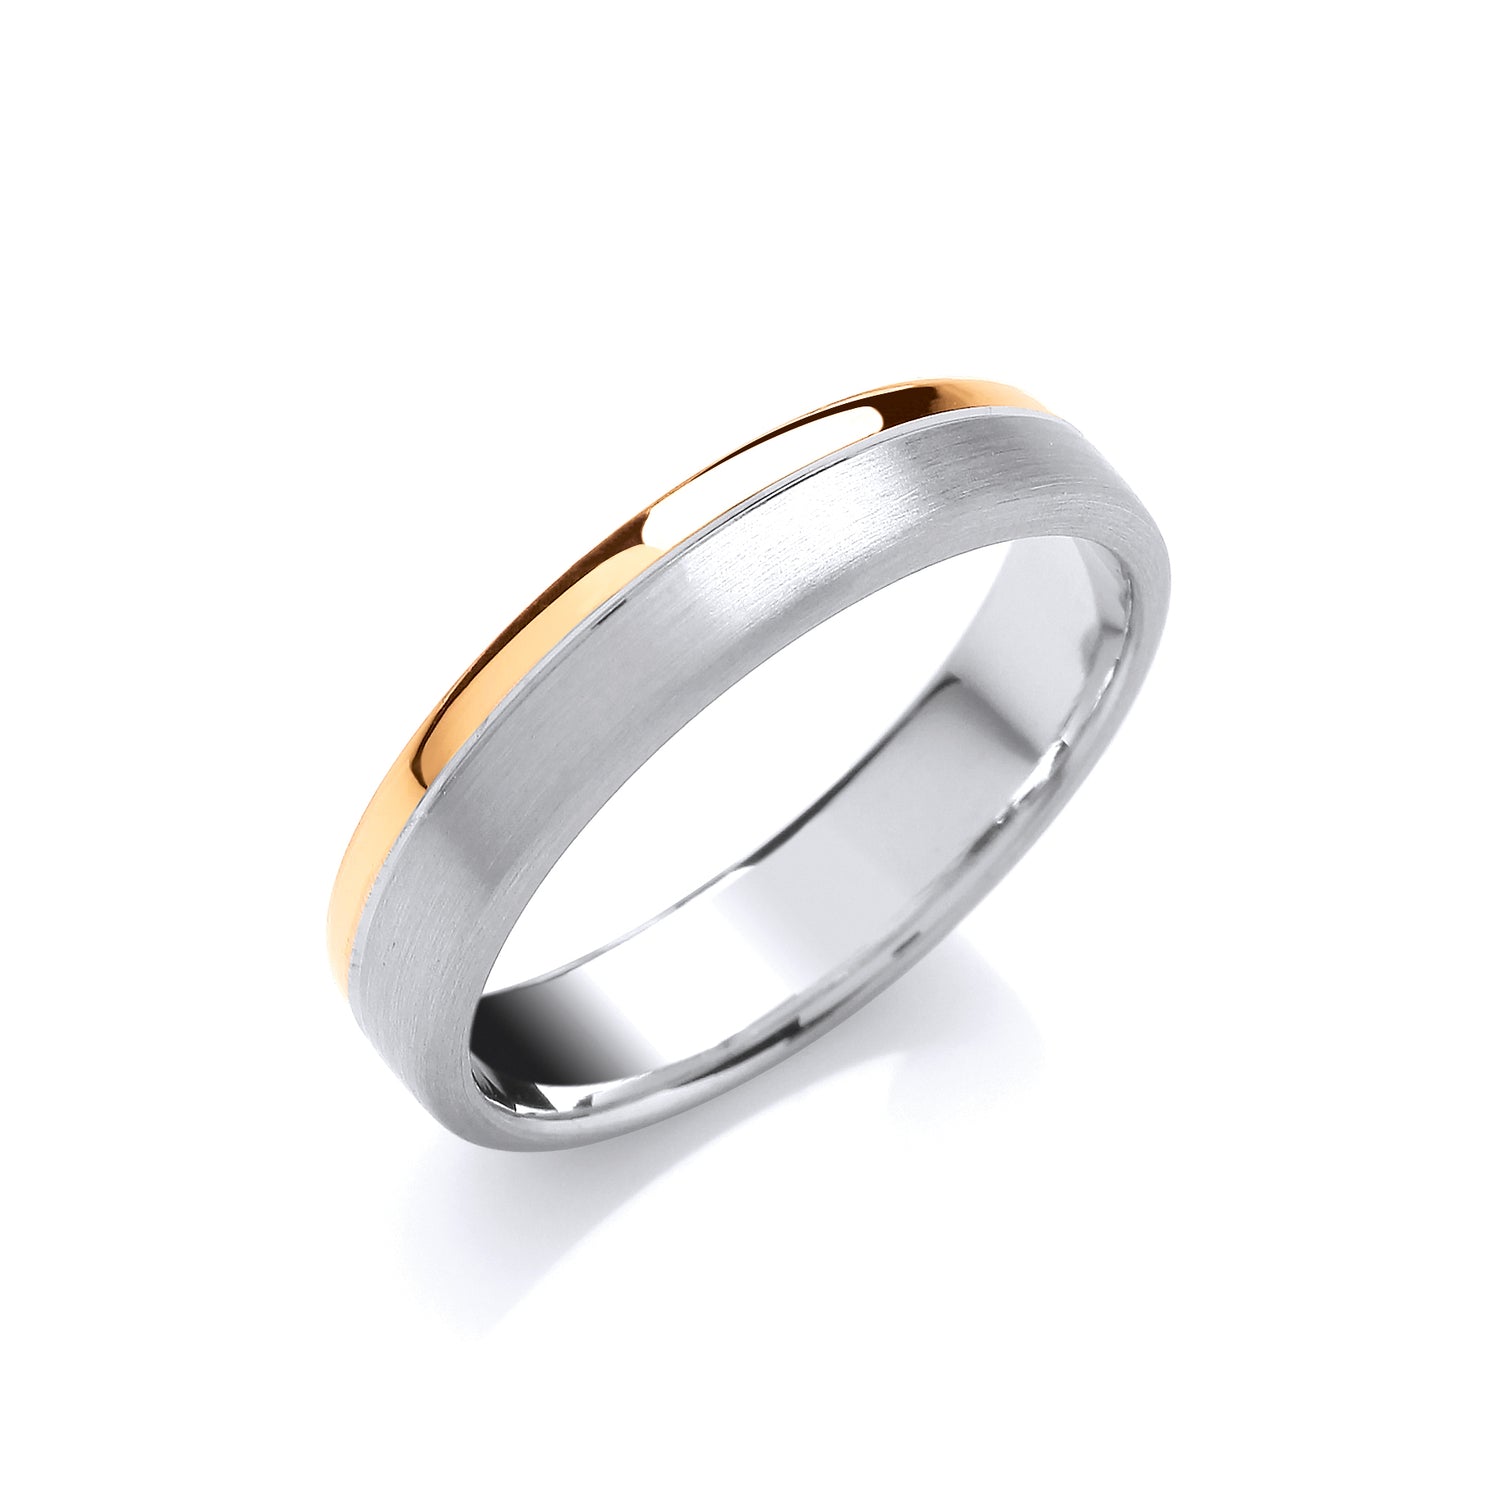 5mm 9CT Two Colour Matte and Polished Finish Wedding Band - Robert Anthony Jewellers, Edinburgh